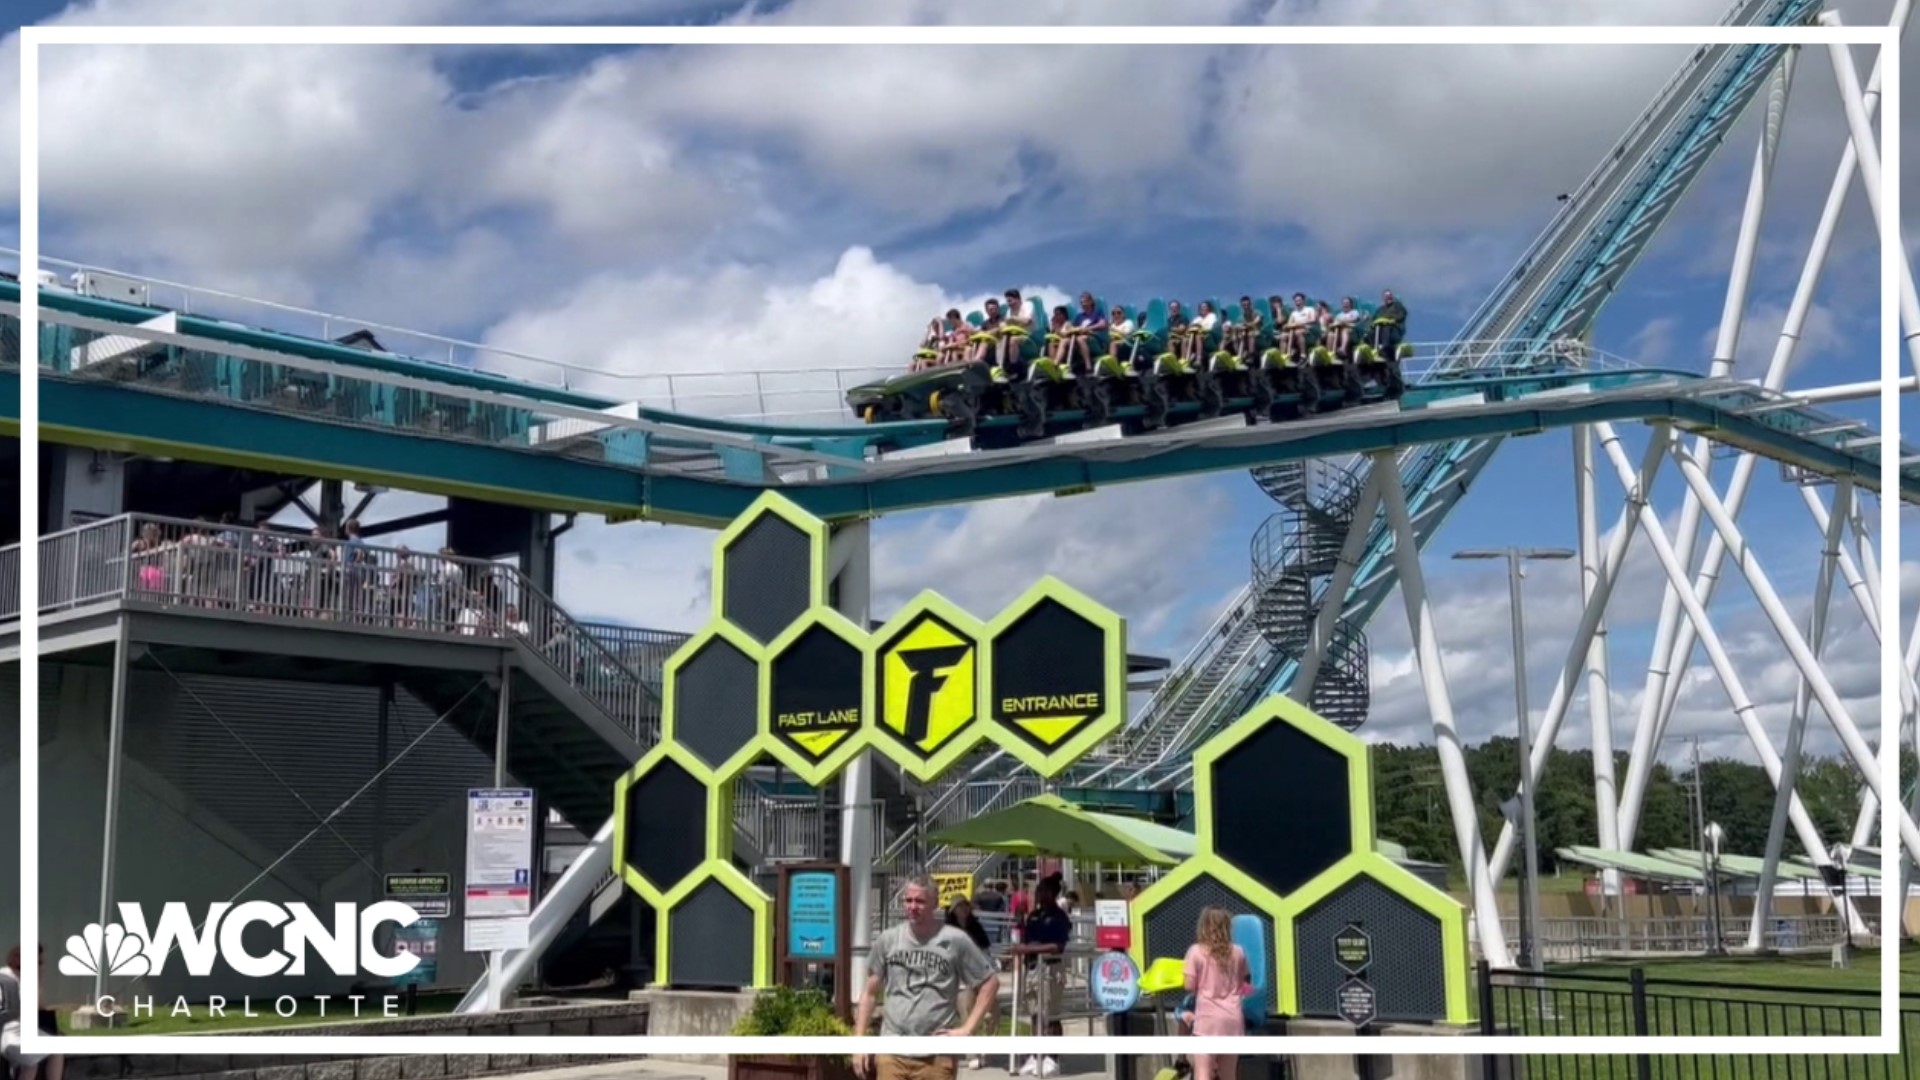 Fury 325 Carowinds is back up and running today after passing key inspections!